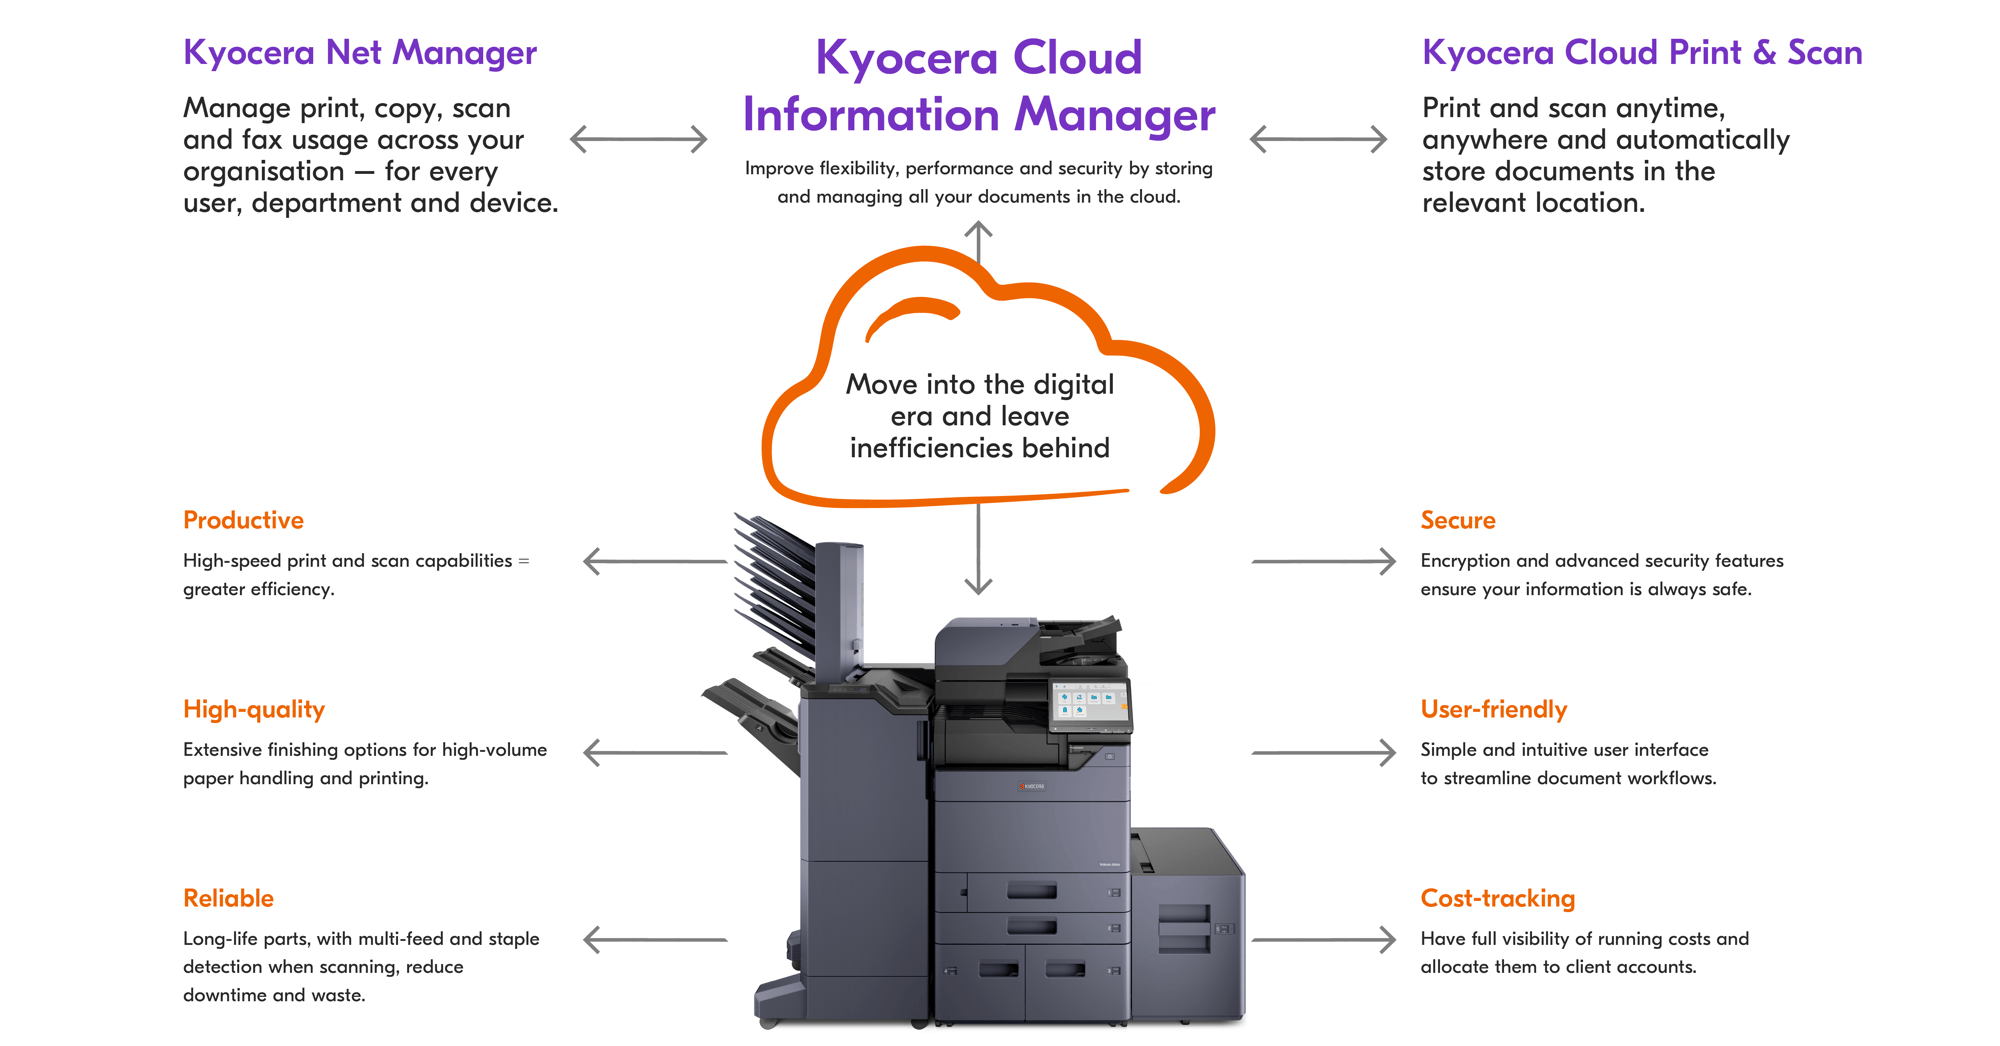 Kyocera's print & document environment for legal services